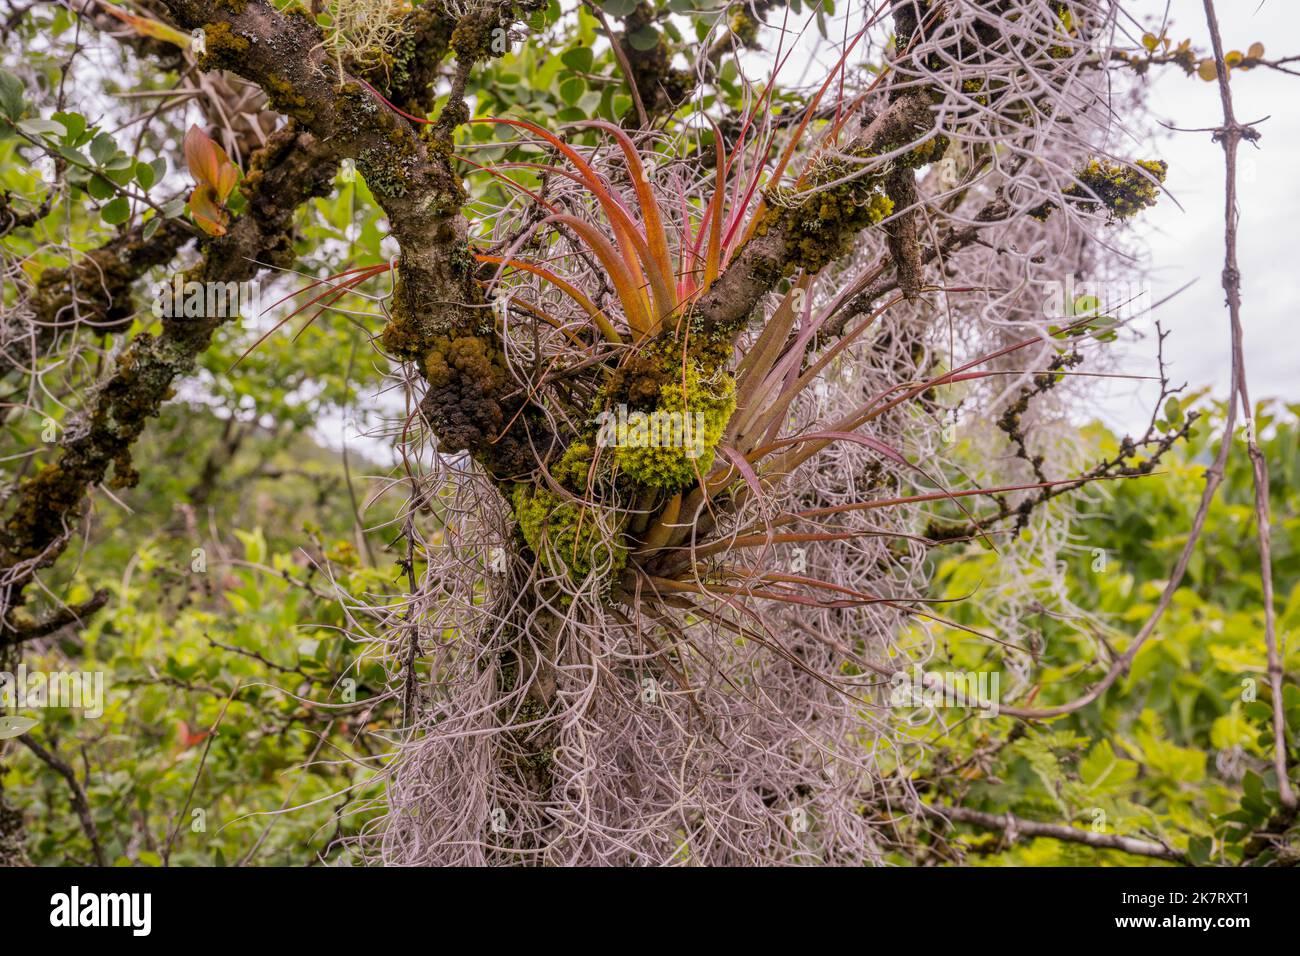 trees-covered-with-spanish-moss-and-tillandsia-capitata-plants-in-the-cloud-forest-along-the-trail-to-the-hill-of-the-jaguar-an-important-zapotec-rel-2K7RXT1.jpg